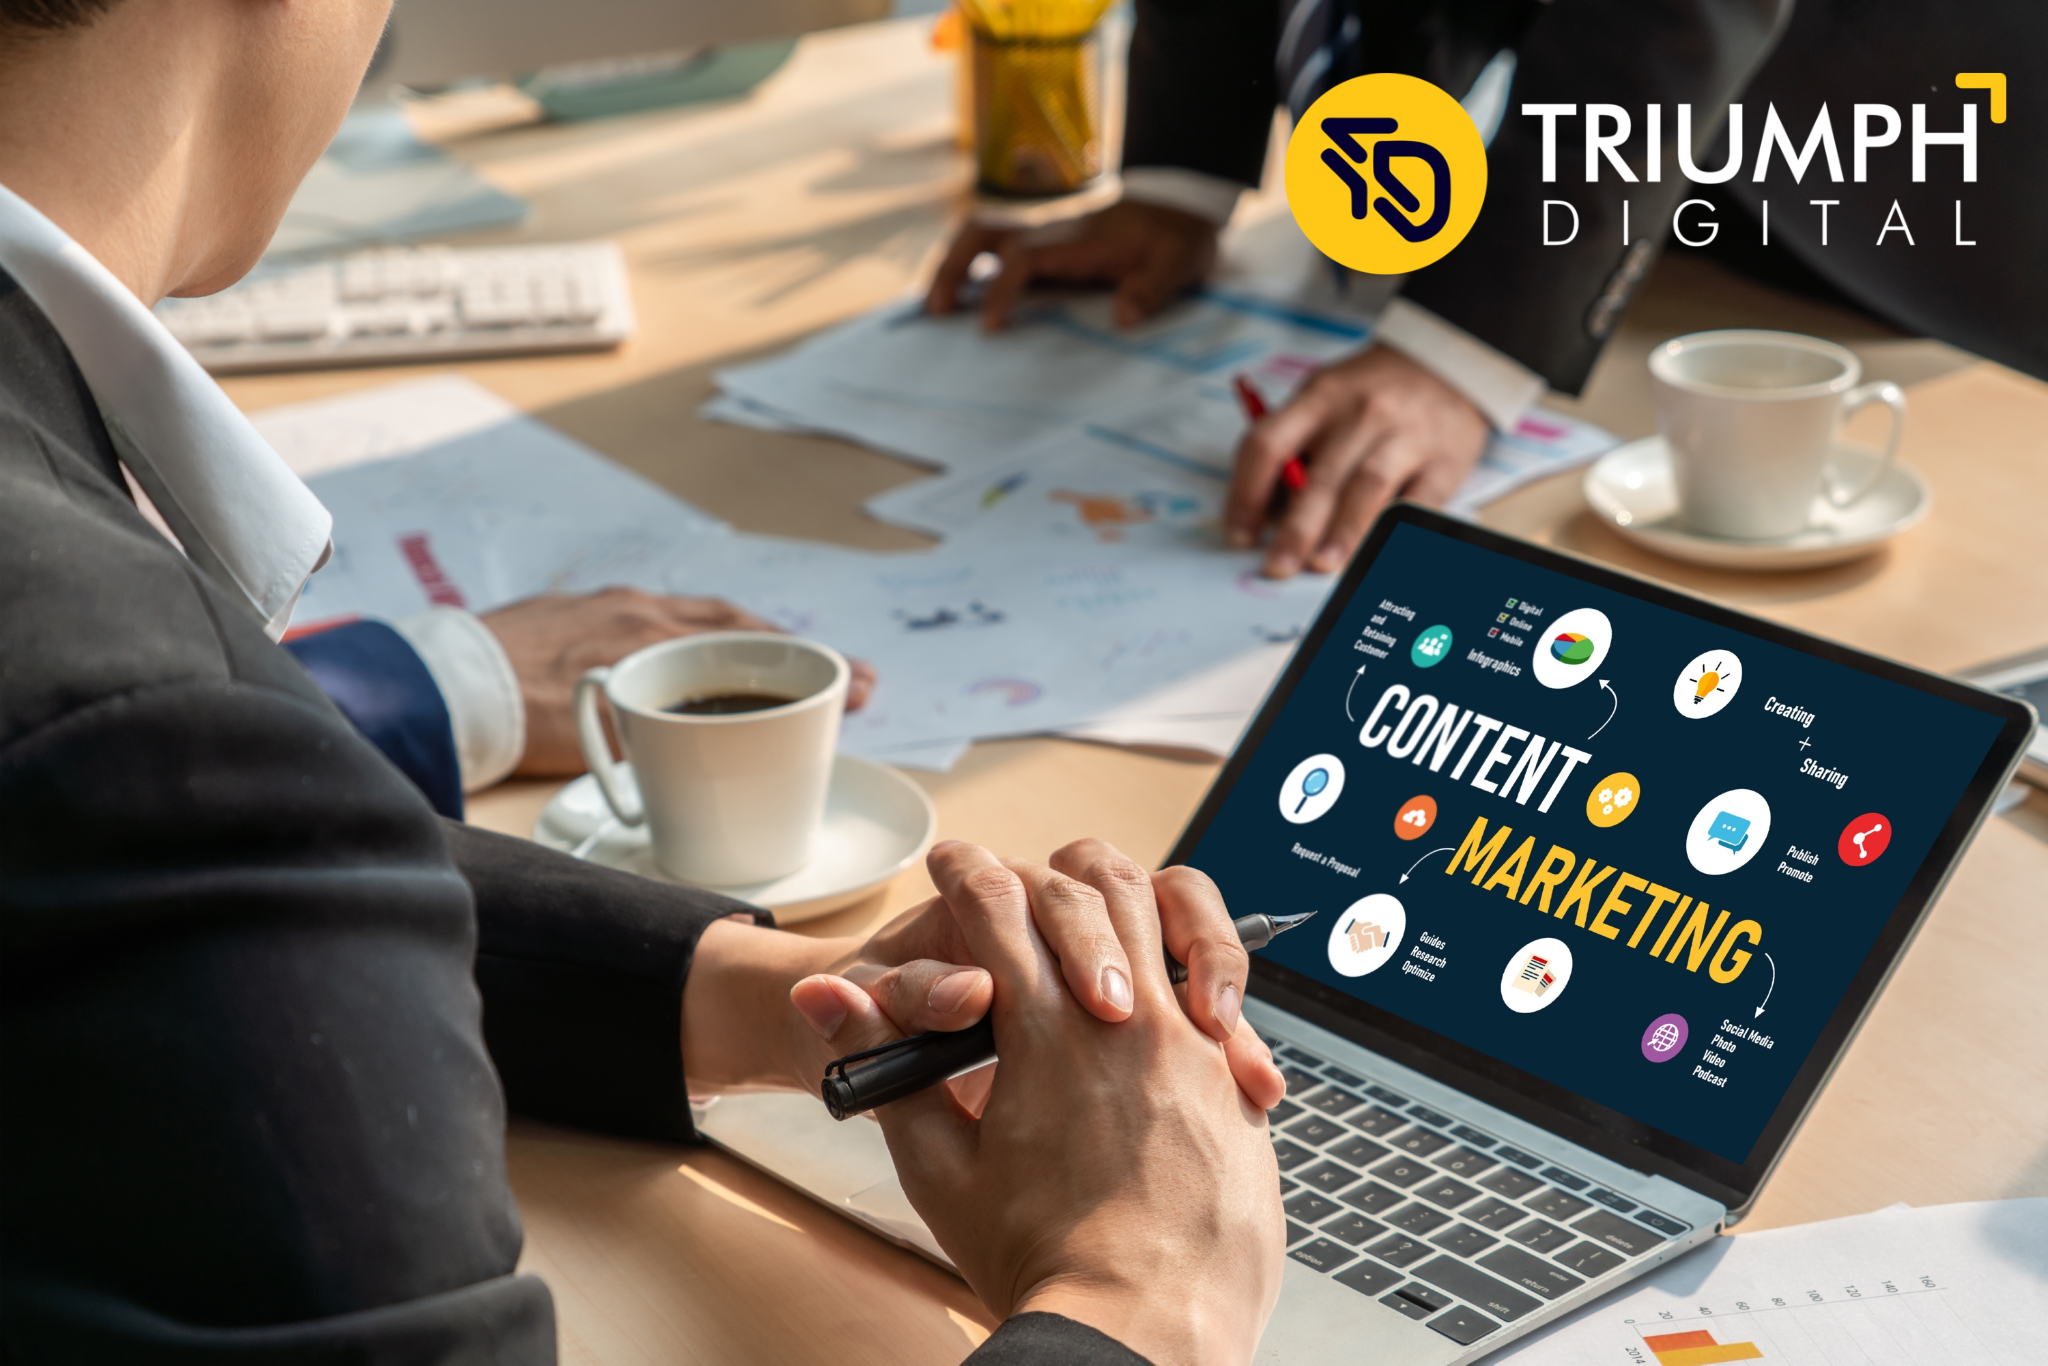 Revolutionize Your Small Business with These Digital Marketing Strategies